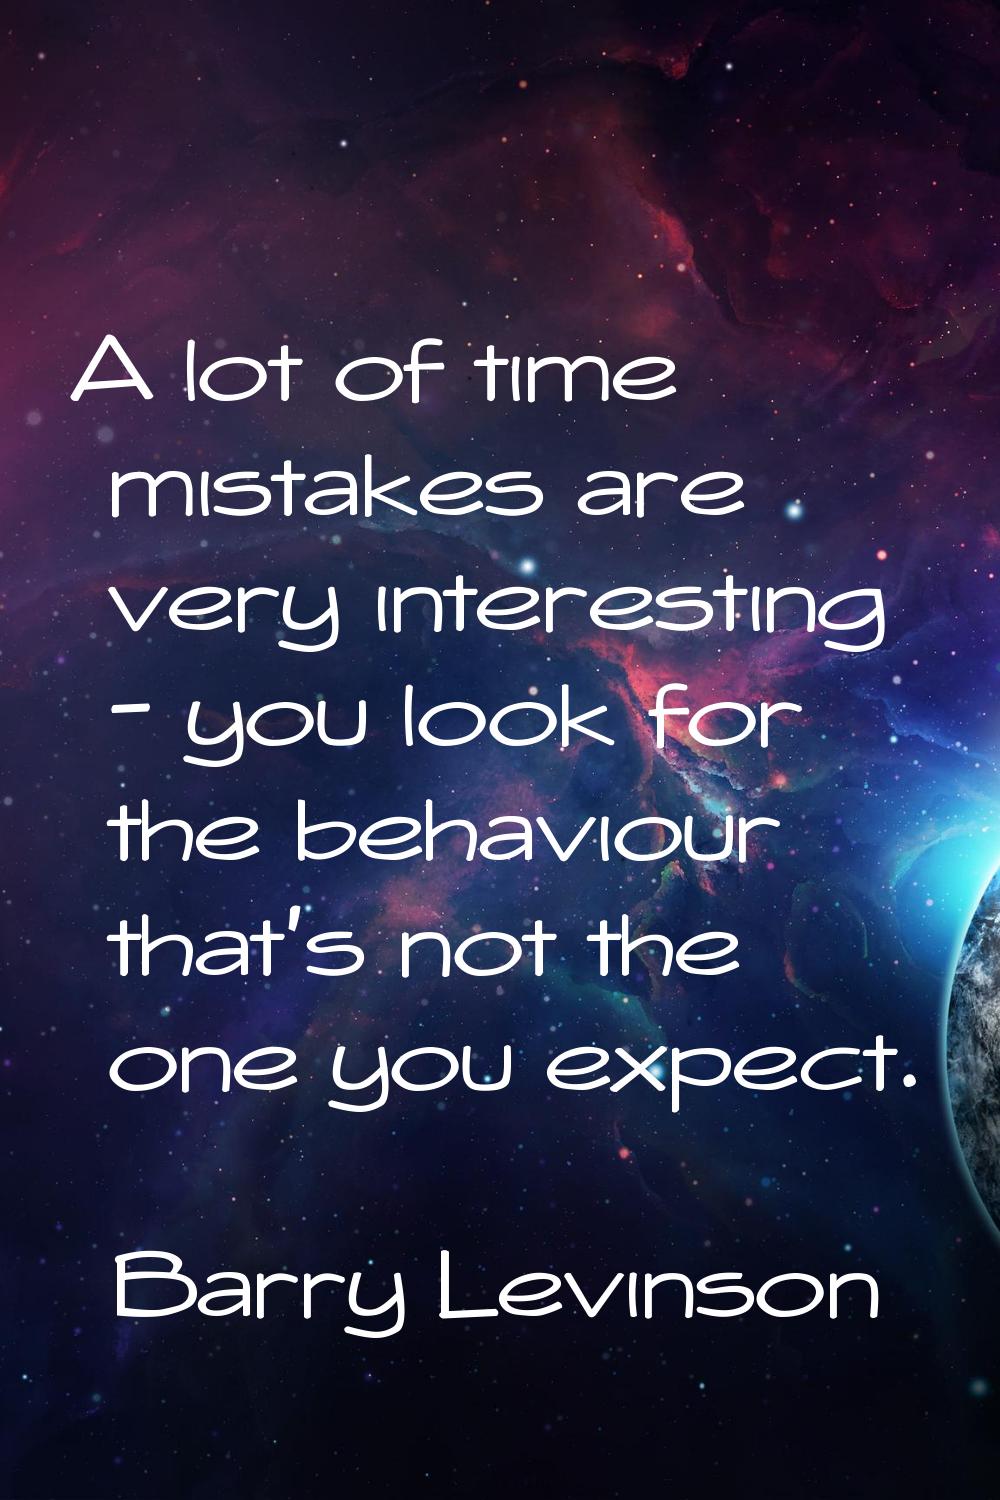 A lot of time mistakes are very interesting - you look for the behaviour that's not the one you exp